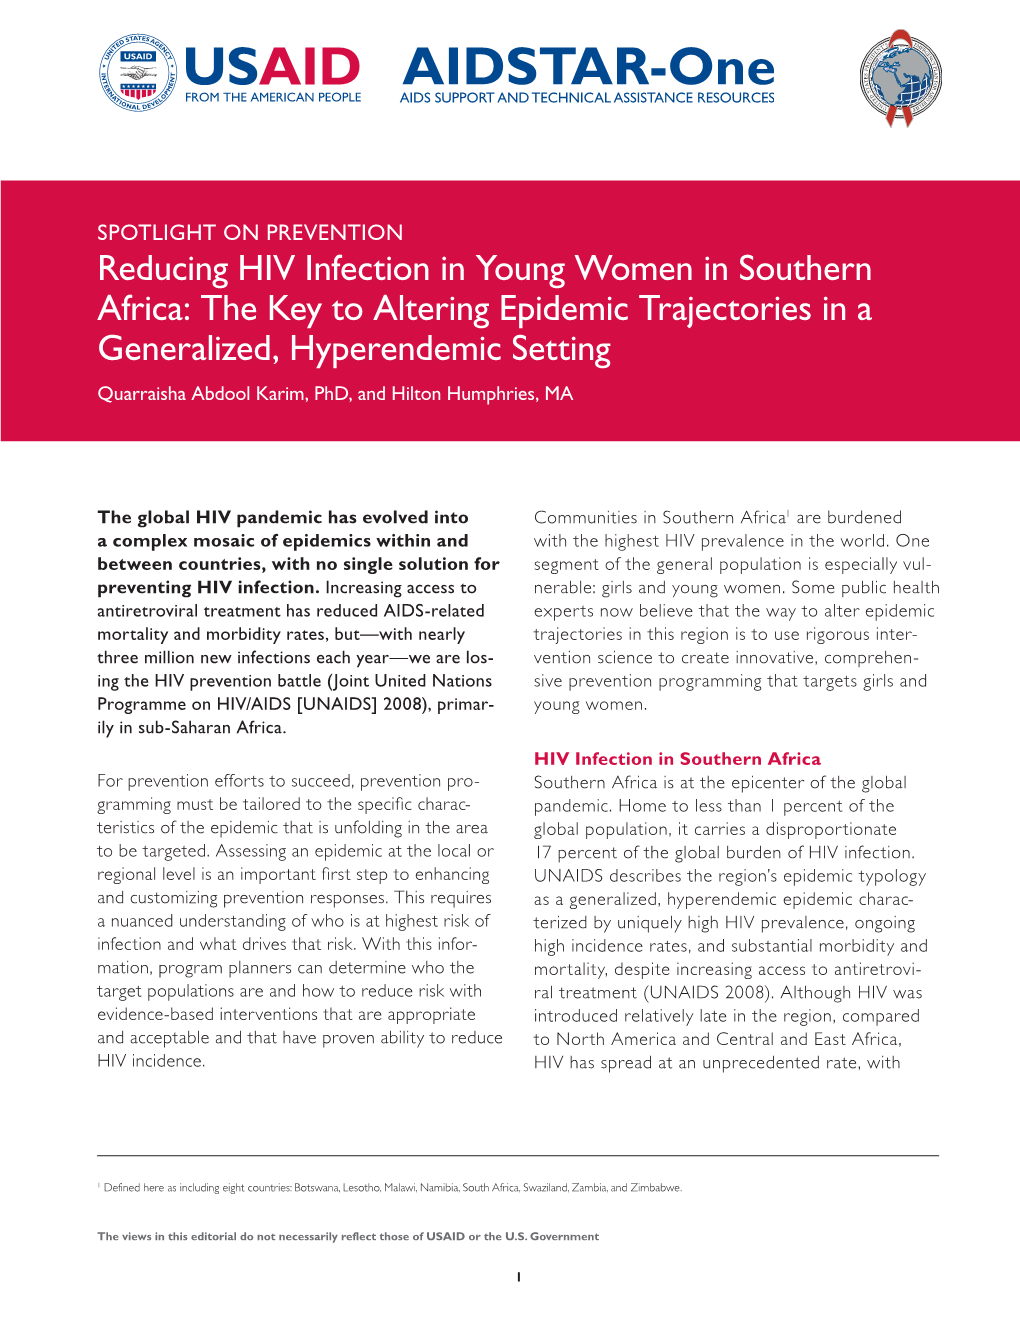 Reducing HIV Infection in Young Women in Southern Africa